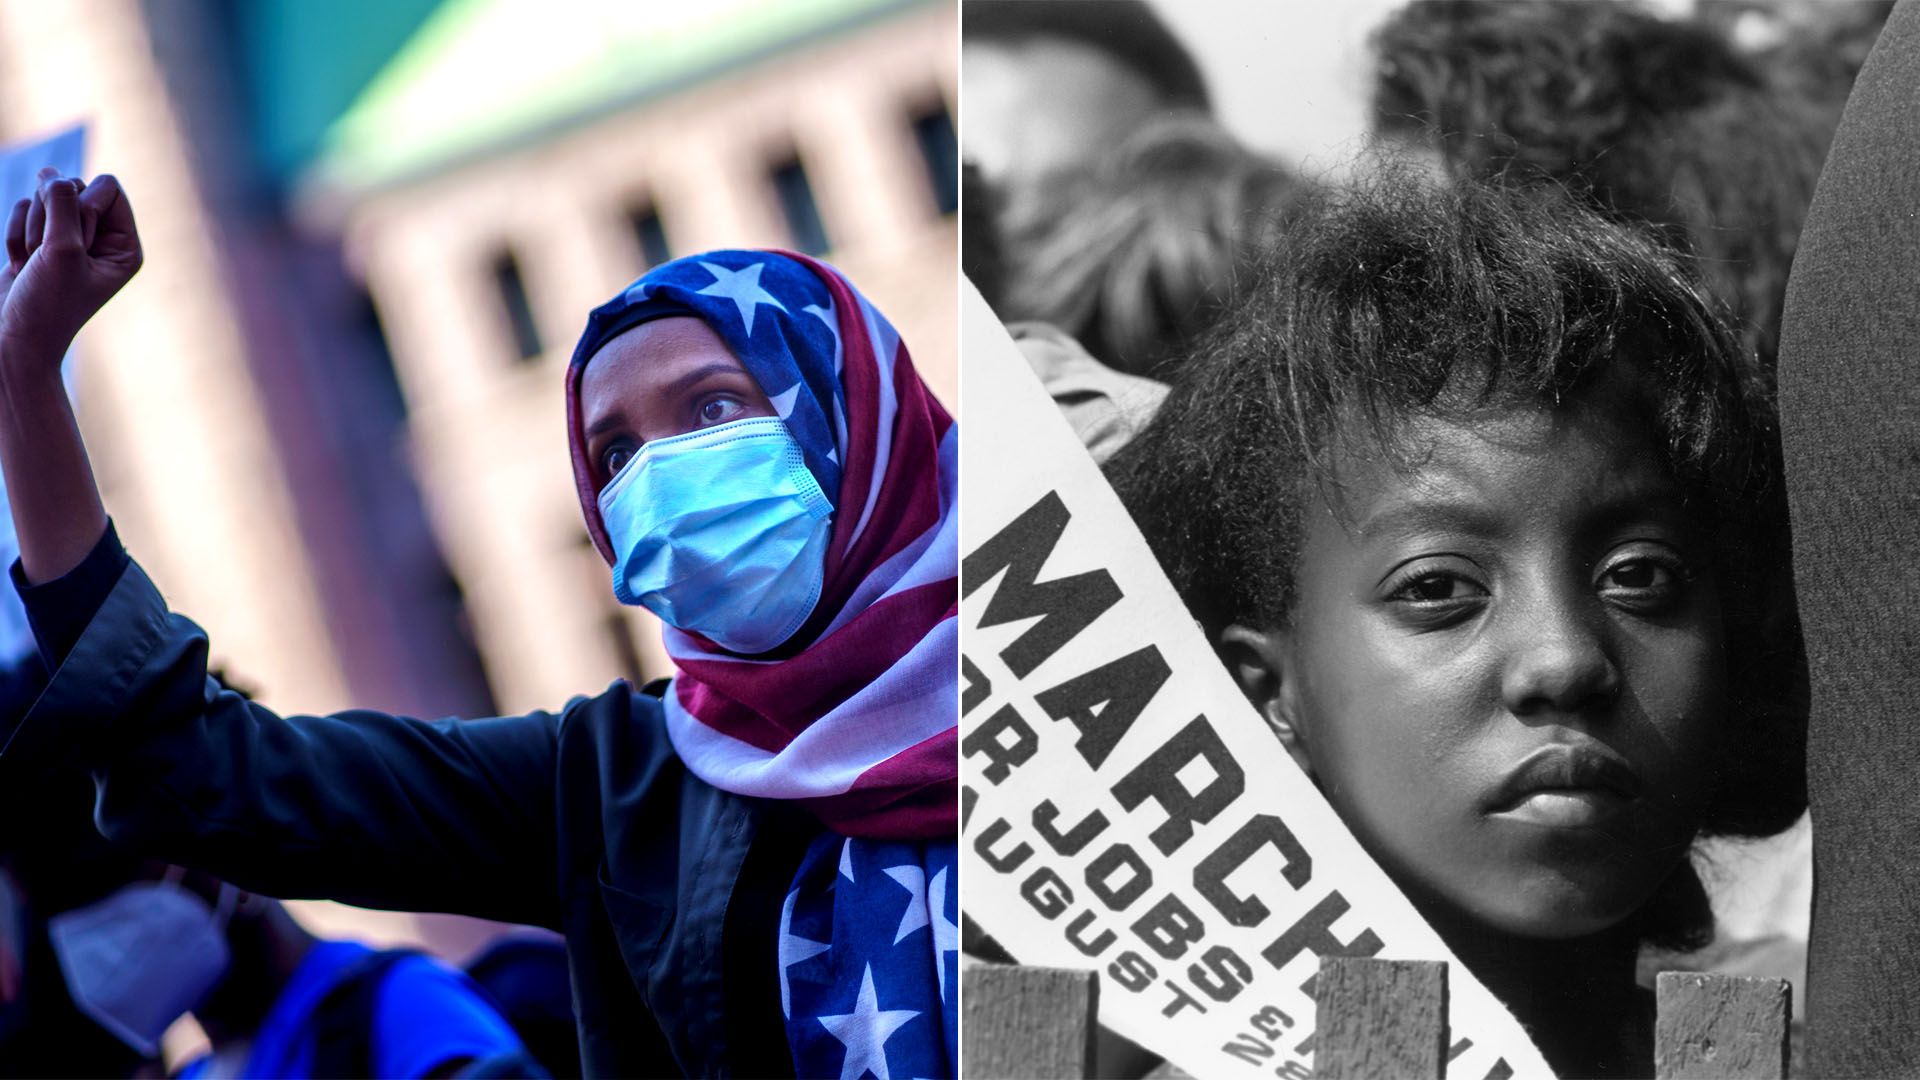 Two images show one woman wearing an American flag hijab and a little girl, but both are protesting racial inequality